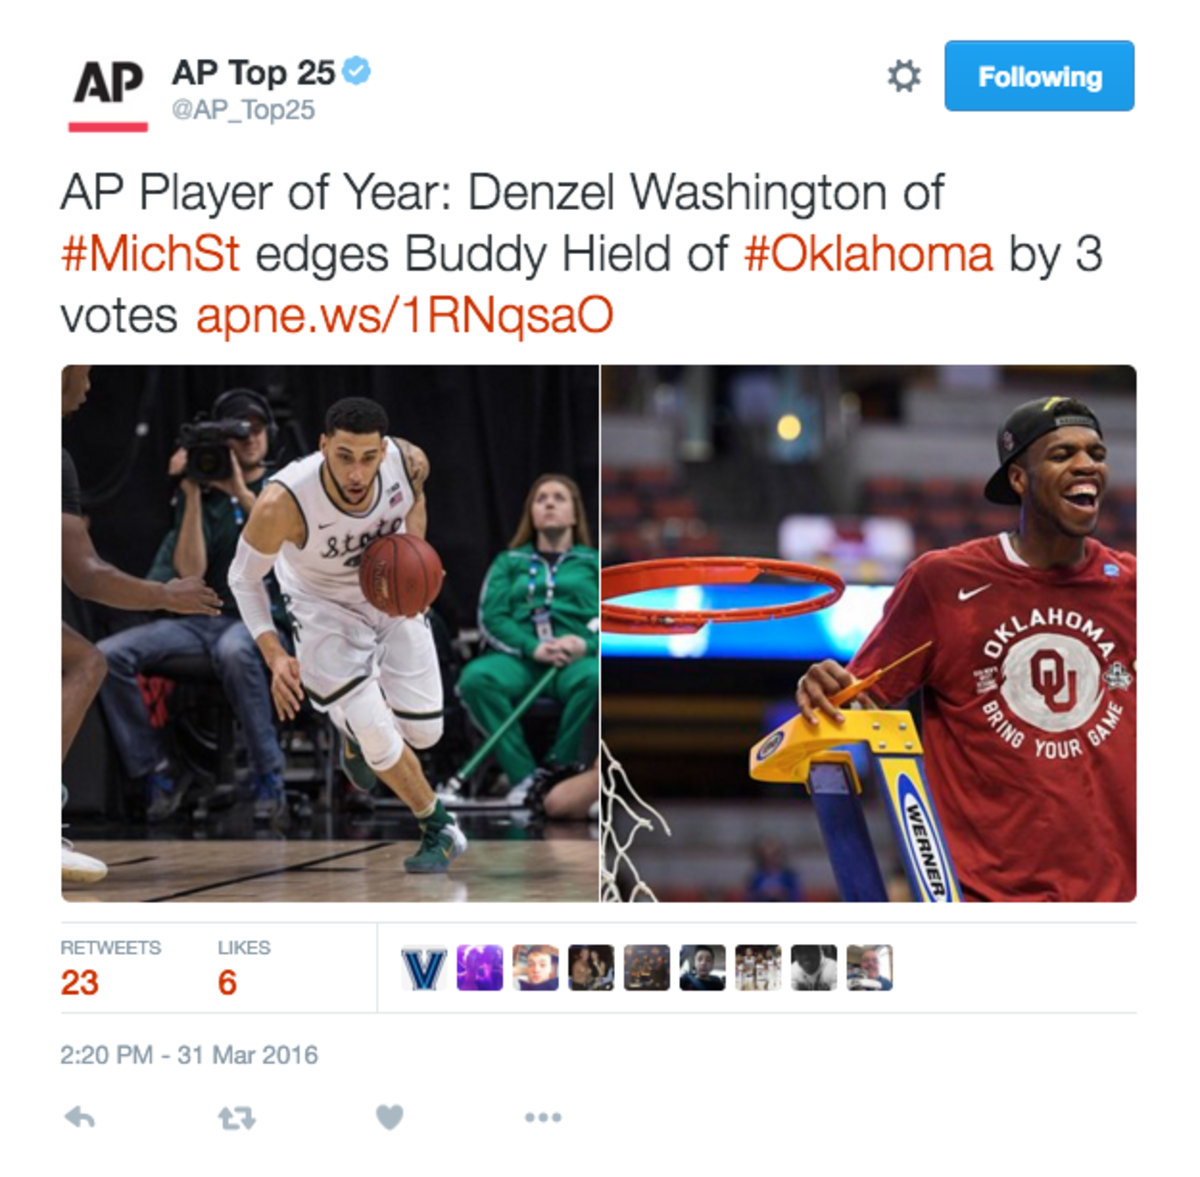 Denzel Washington and Buddy Heild atop the AP player of the year votes.